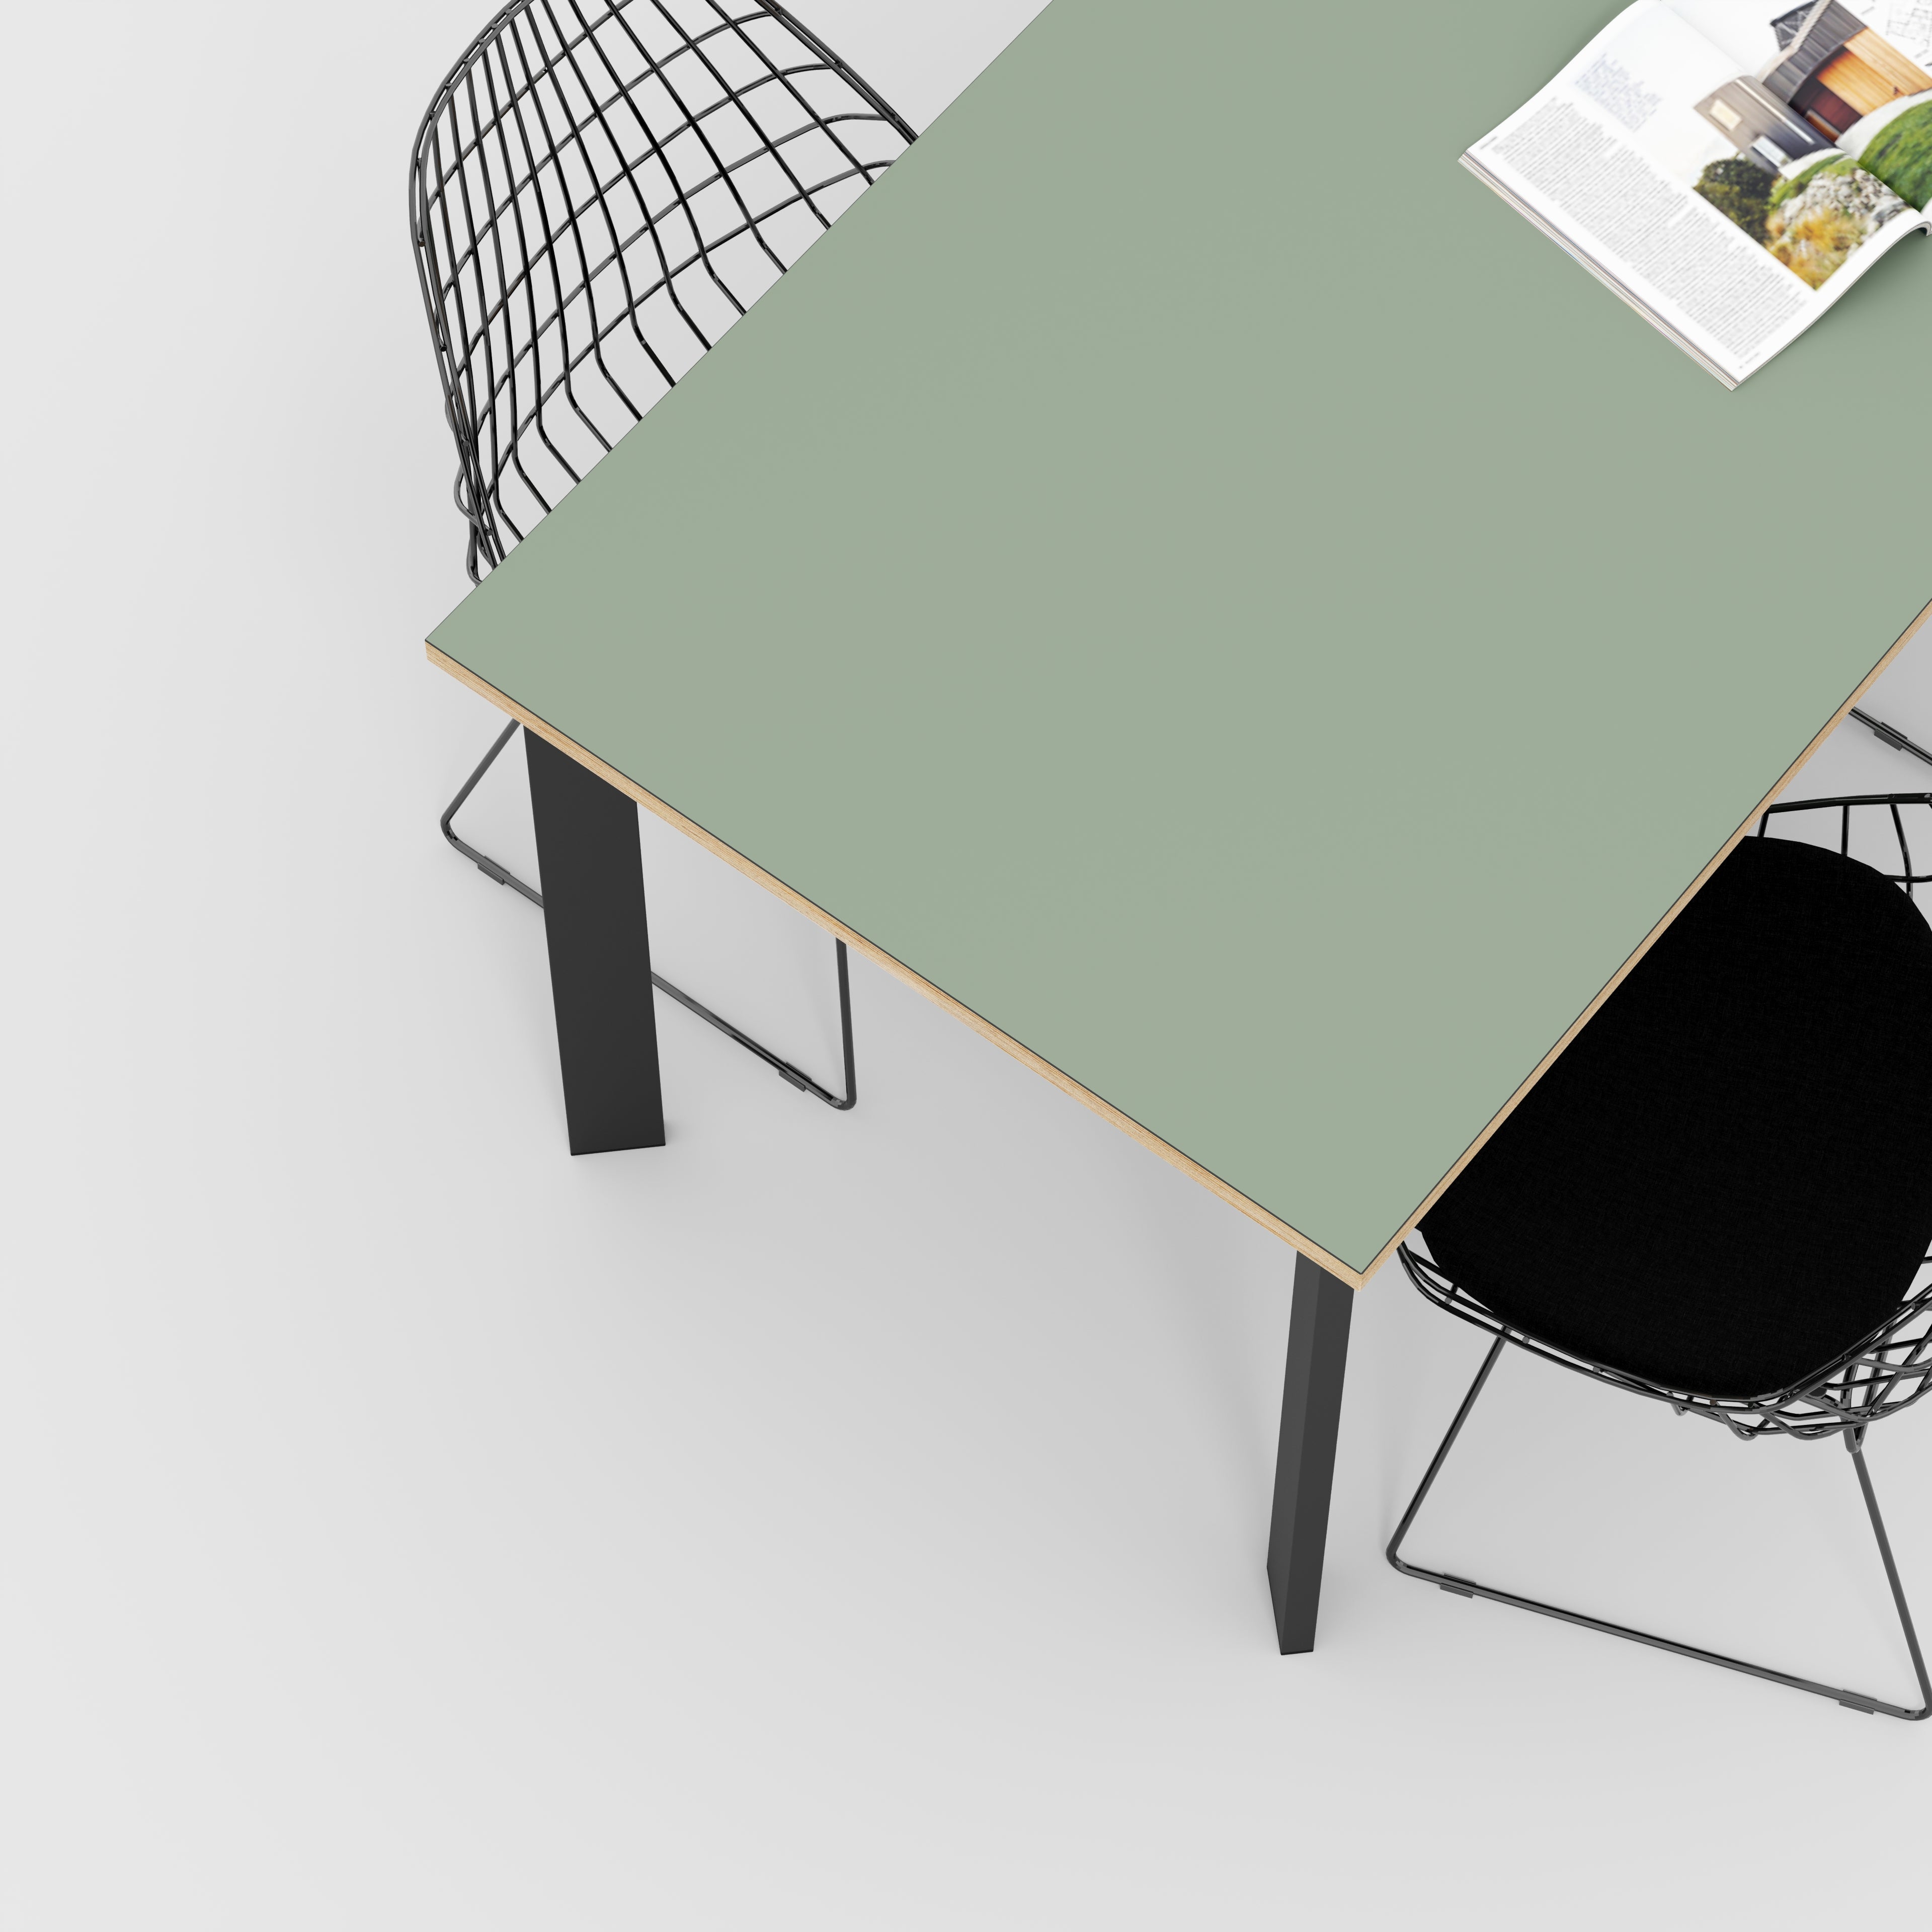 Table with Black Rectangular Single Pin Legs - Formica Green Slate - 1600(w) x 800(d) x 735(h)